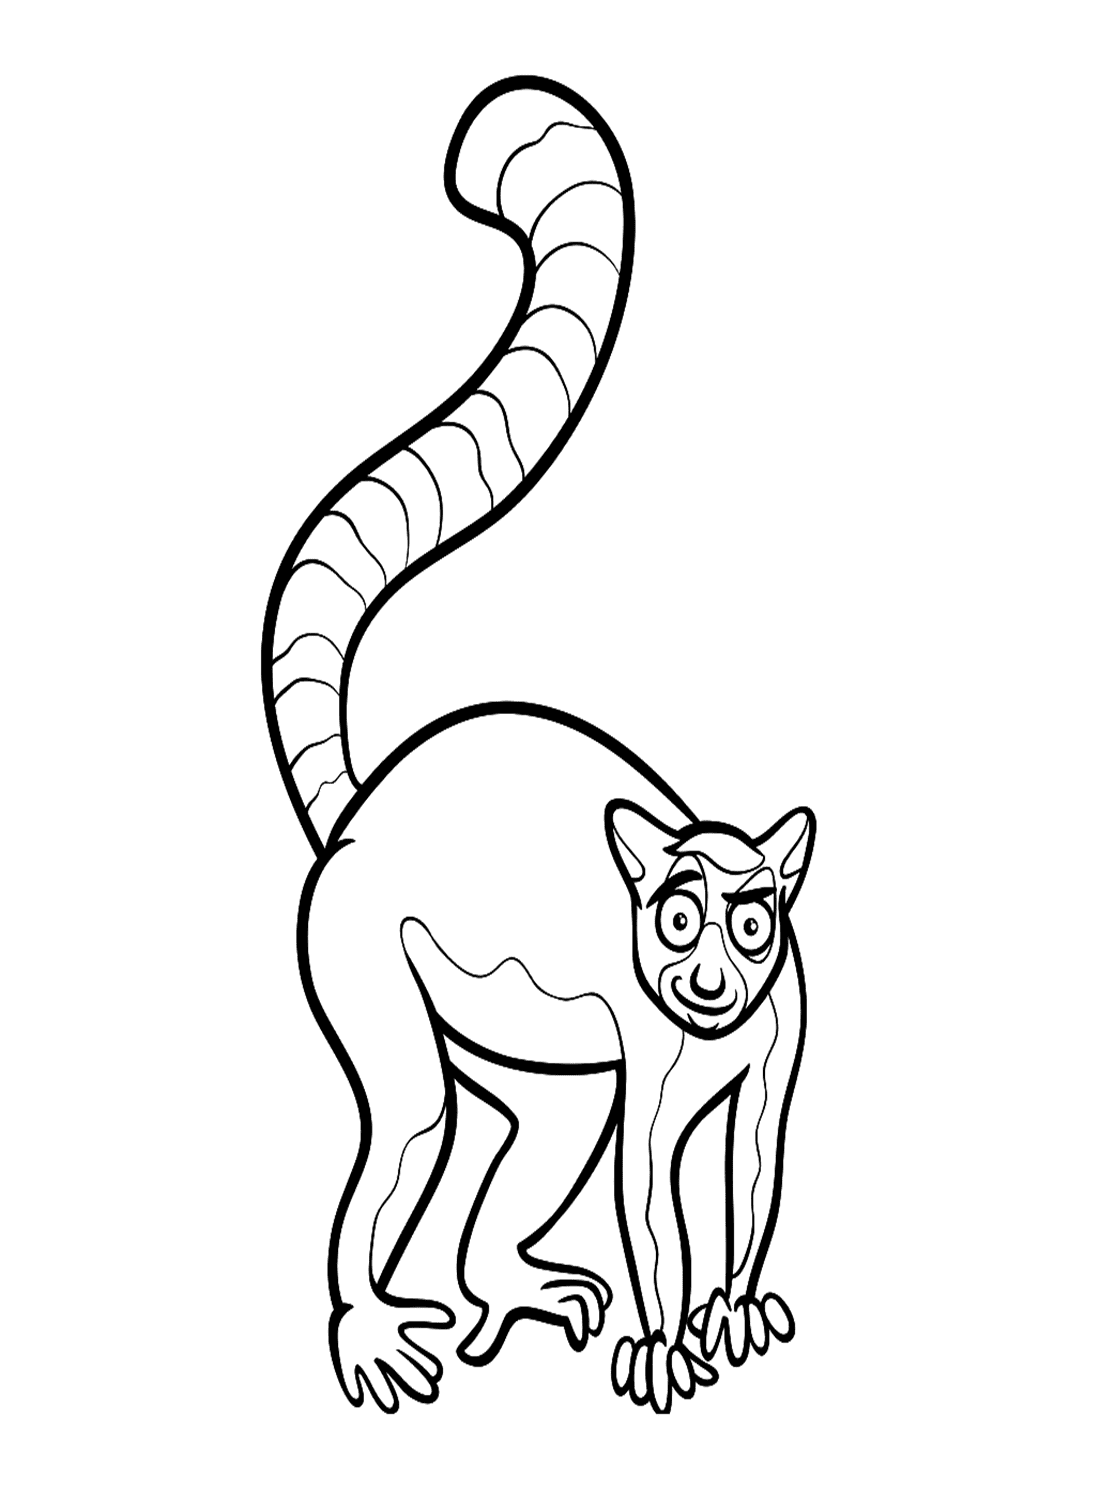 Ring Tailed Lemur Coloring Page - Free Printable Coloring Pages